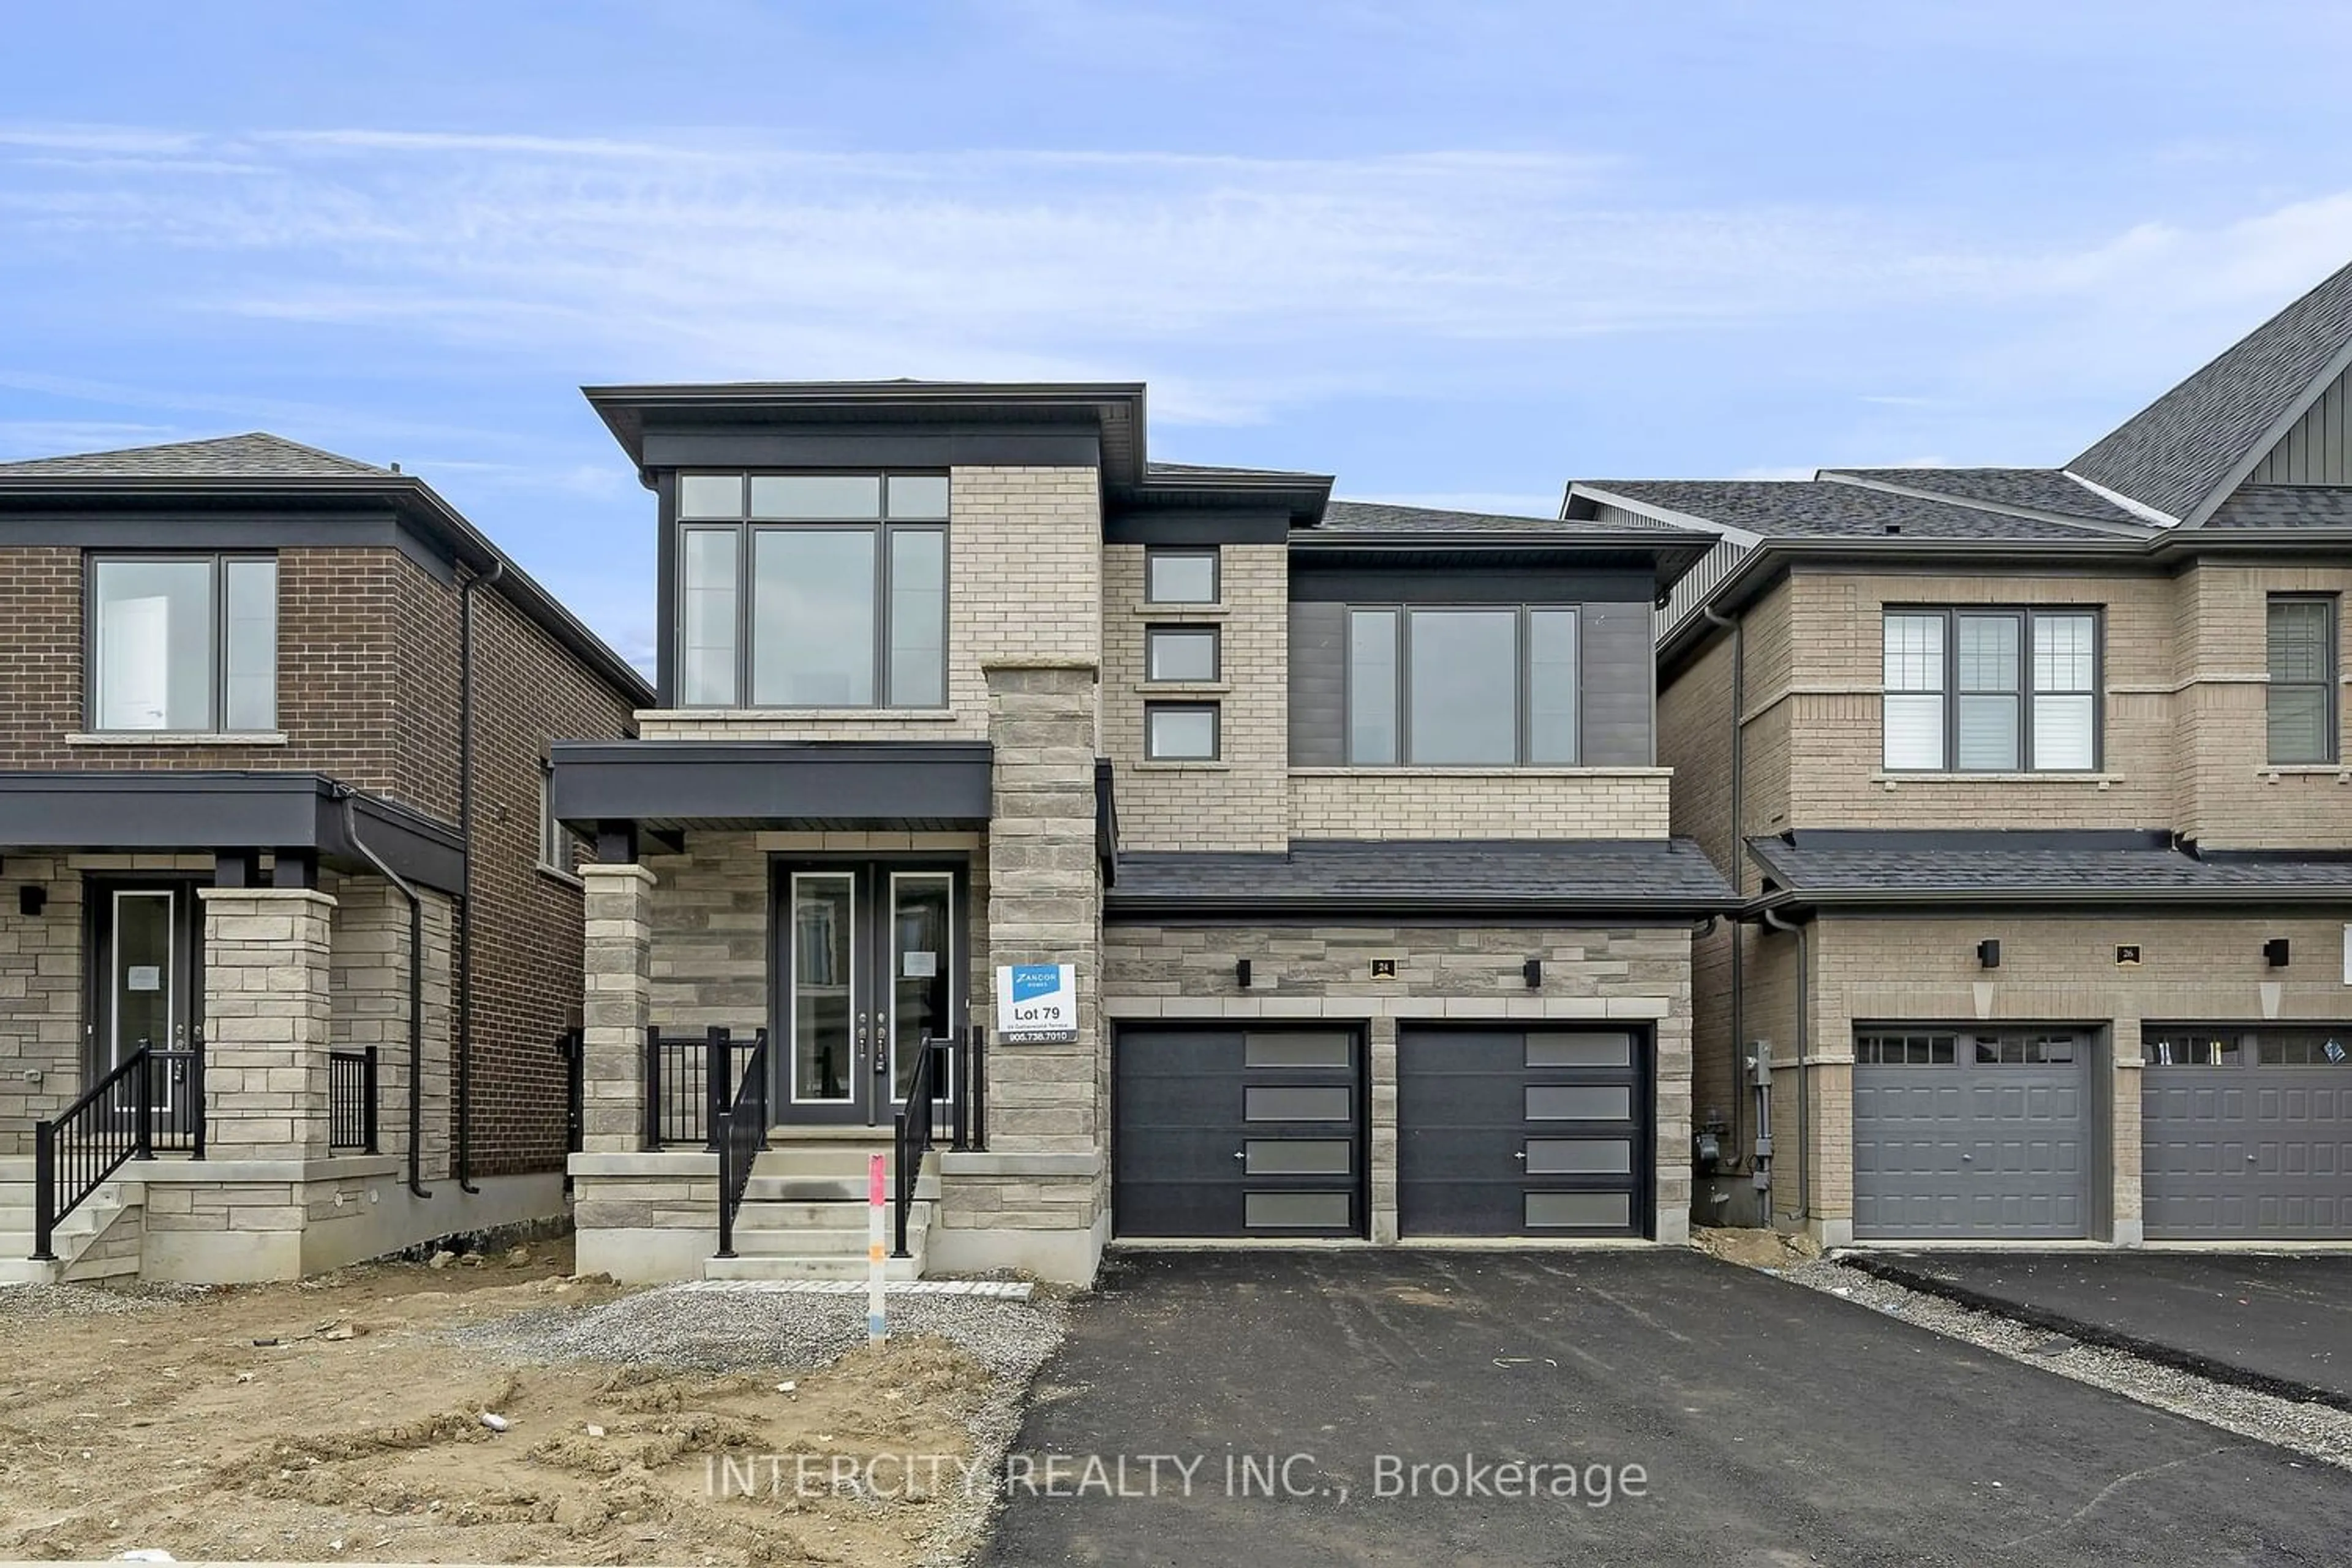 Home with brick exterior material for 24 Gatherwood Terr, Caledon Ontario L7C 4M4